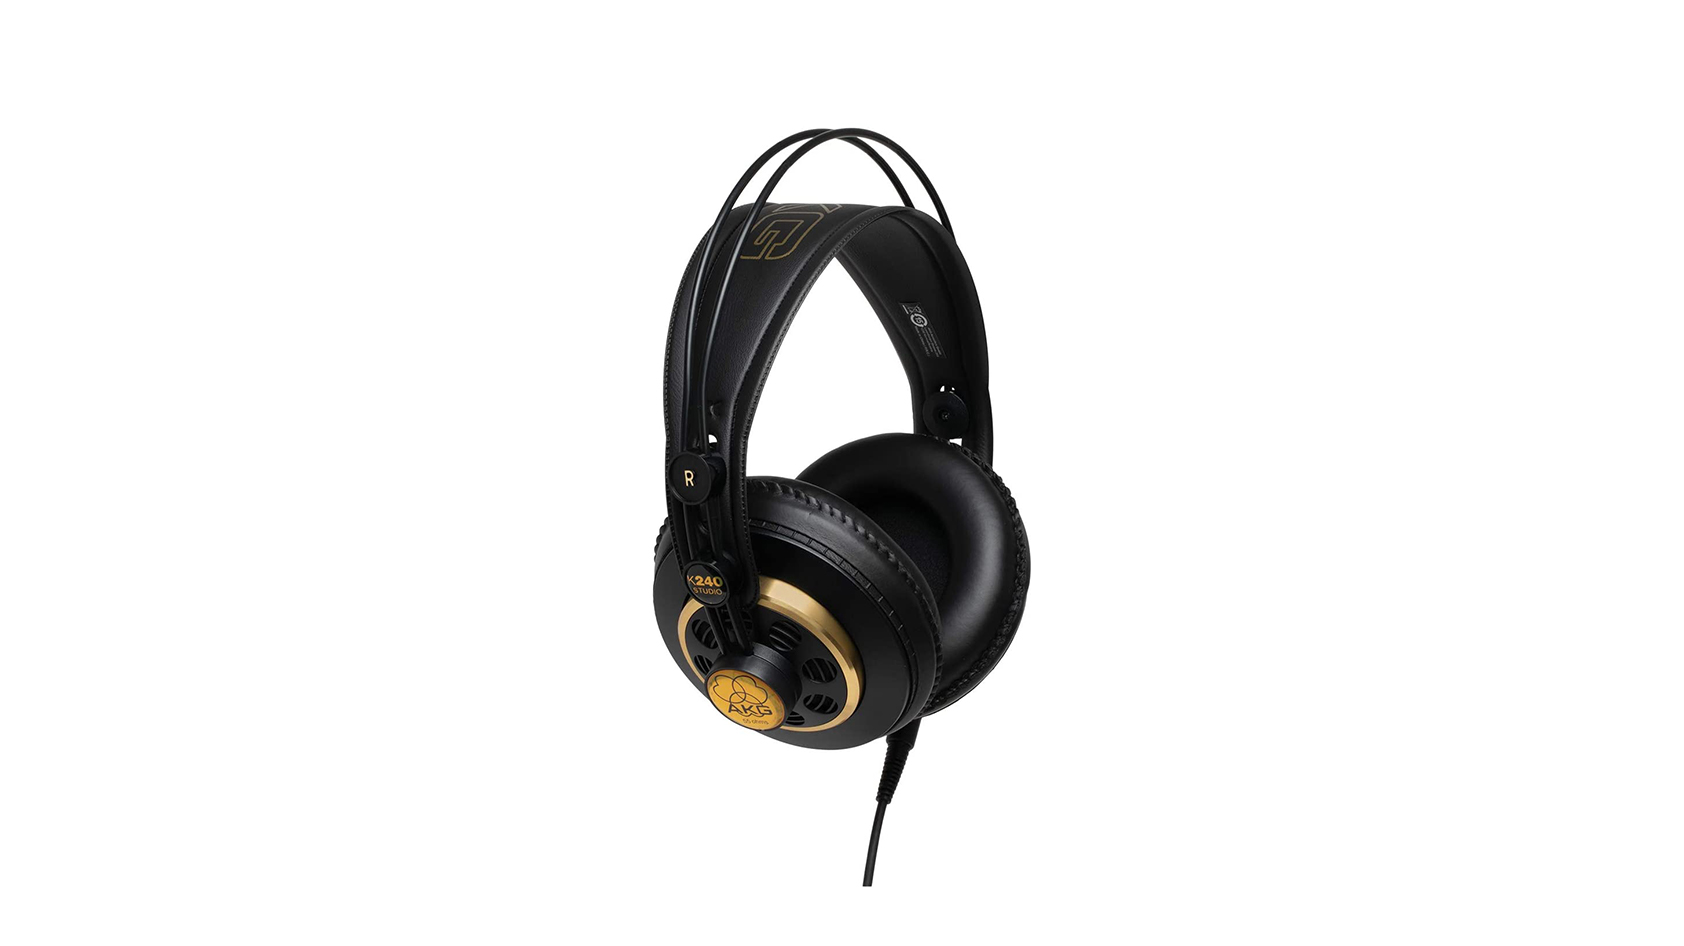 The AKG K240 Studio headphones in black and gold against a white background.